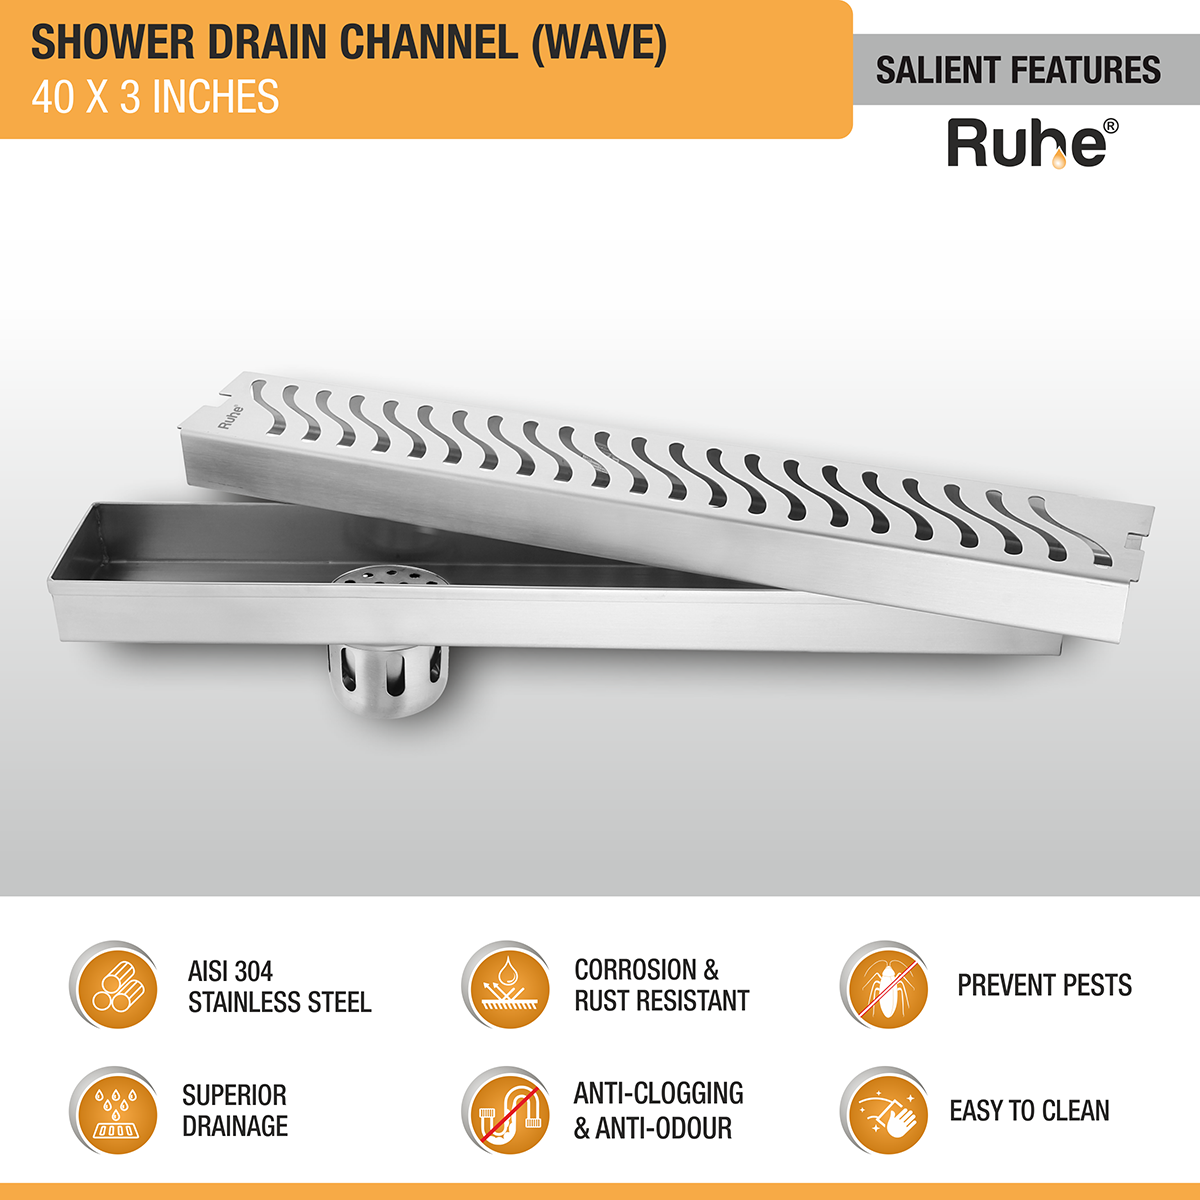 Wave Shower Drain Channel (40 X 3 Inches) with Cockroach Trap (304 Grade) features